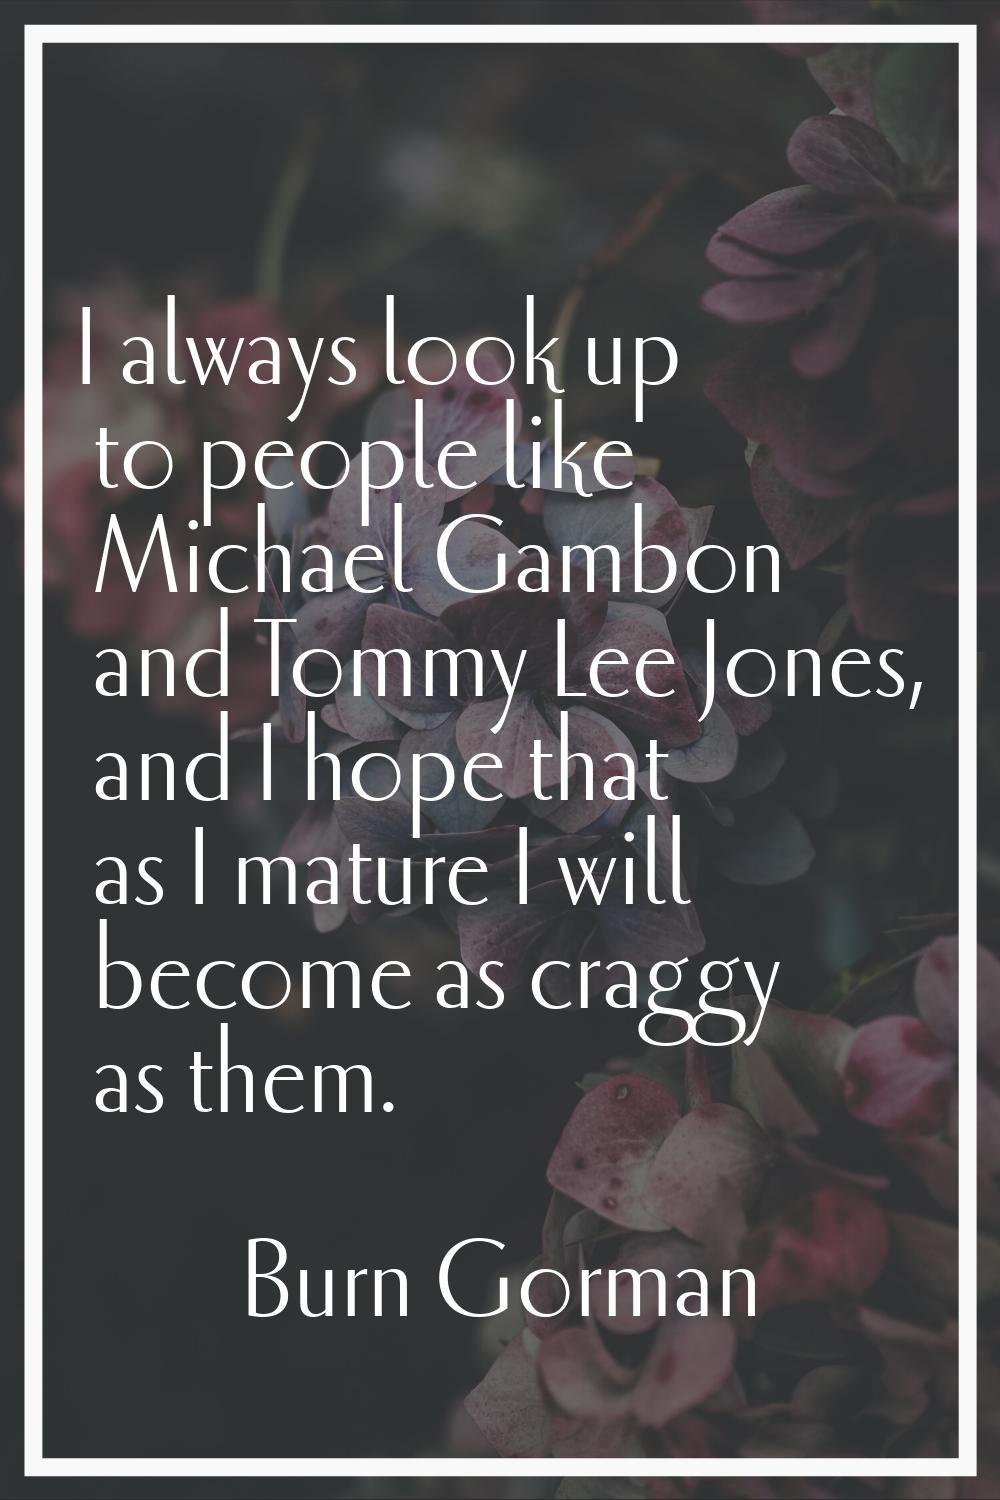 I always look up to people like Michael Gambon and Tommy Lee Jones, and I hope that as I mature I w